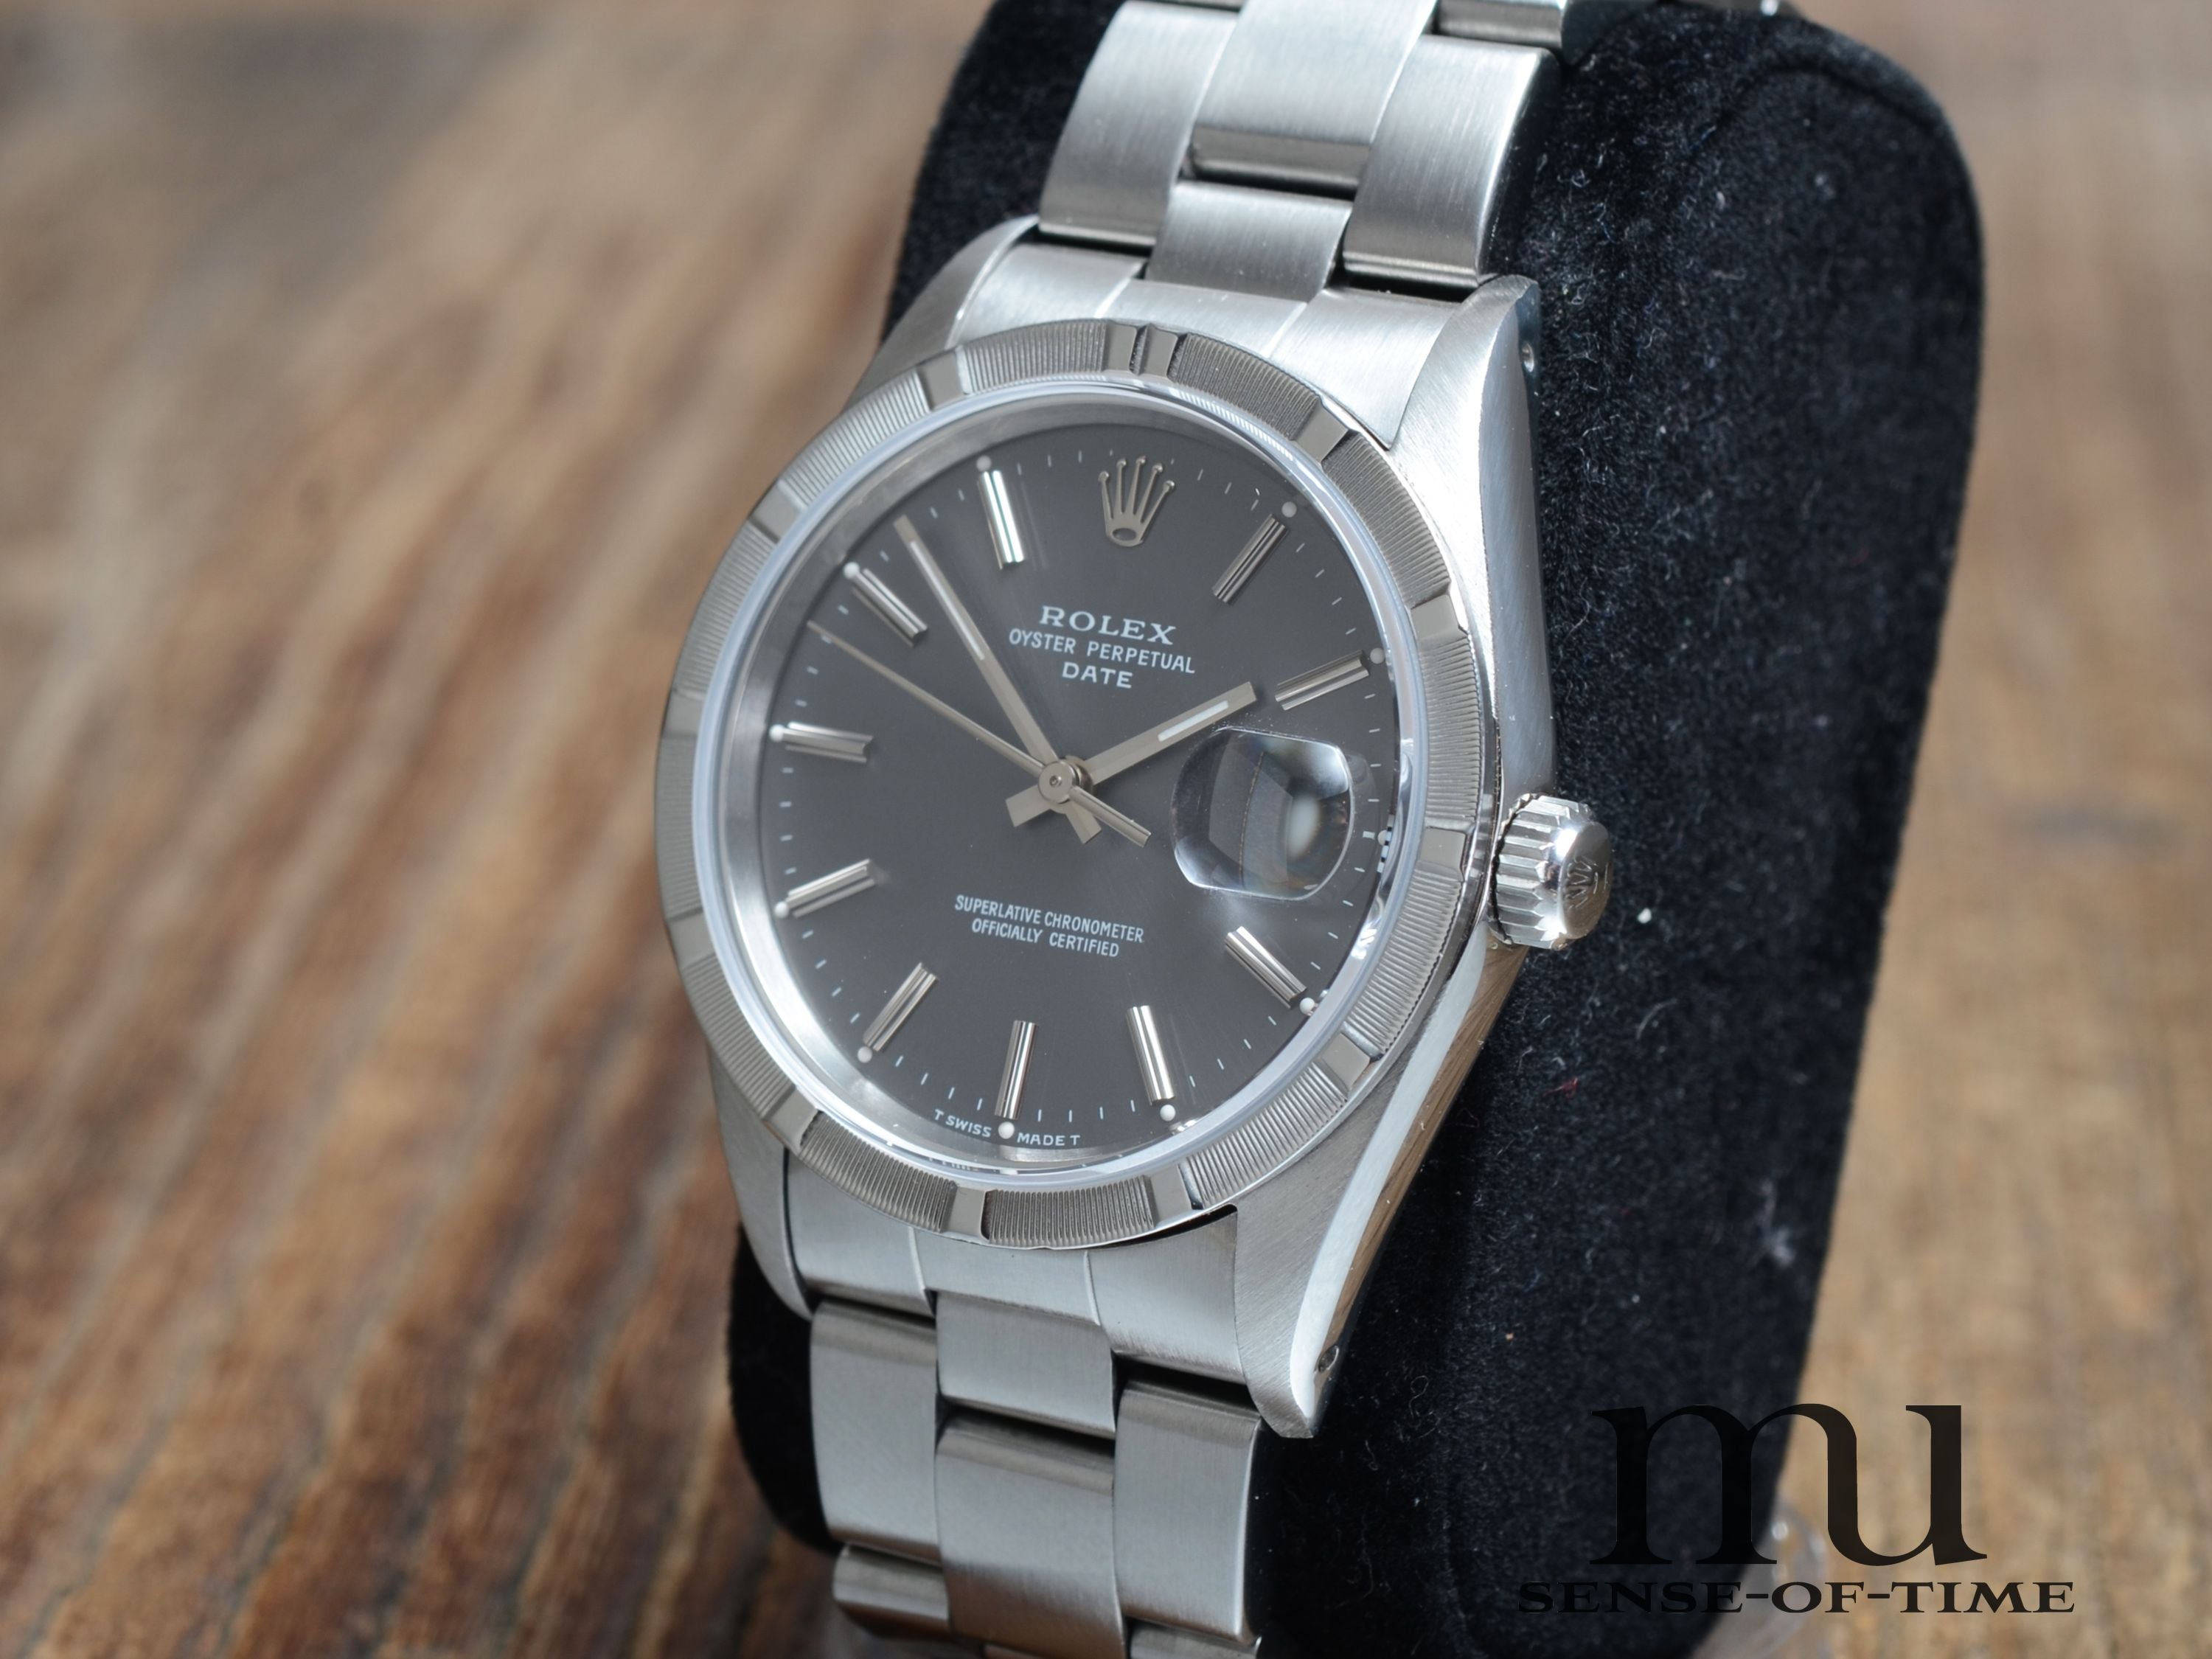 Rolex Oyster Perpetual Date, Grey Dial, Ref.: 15210